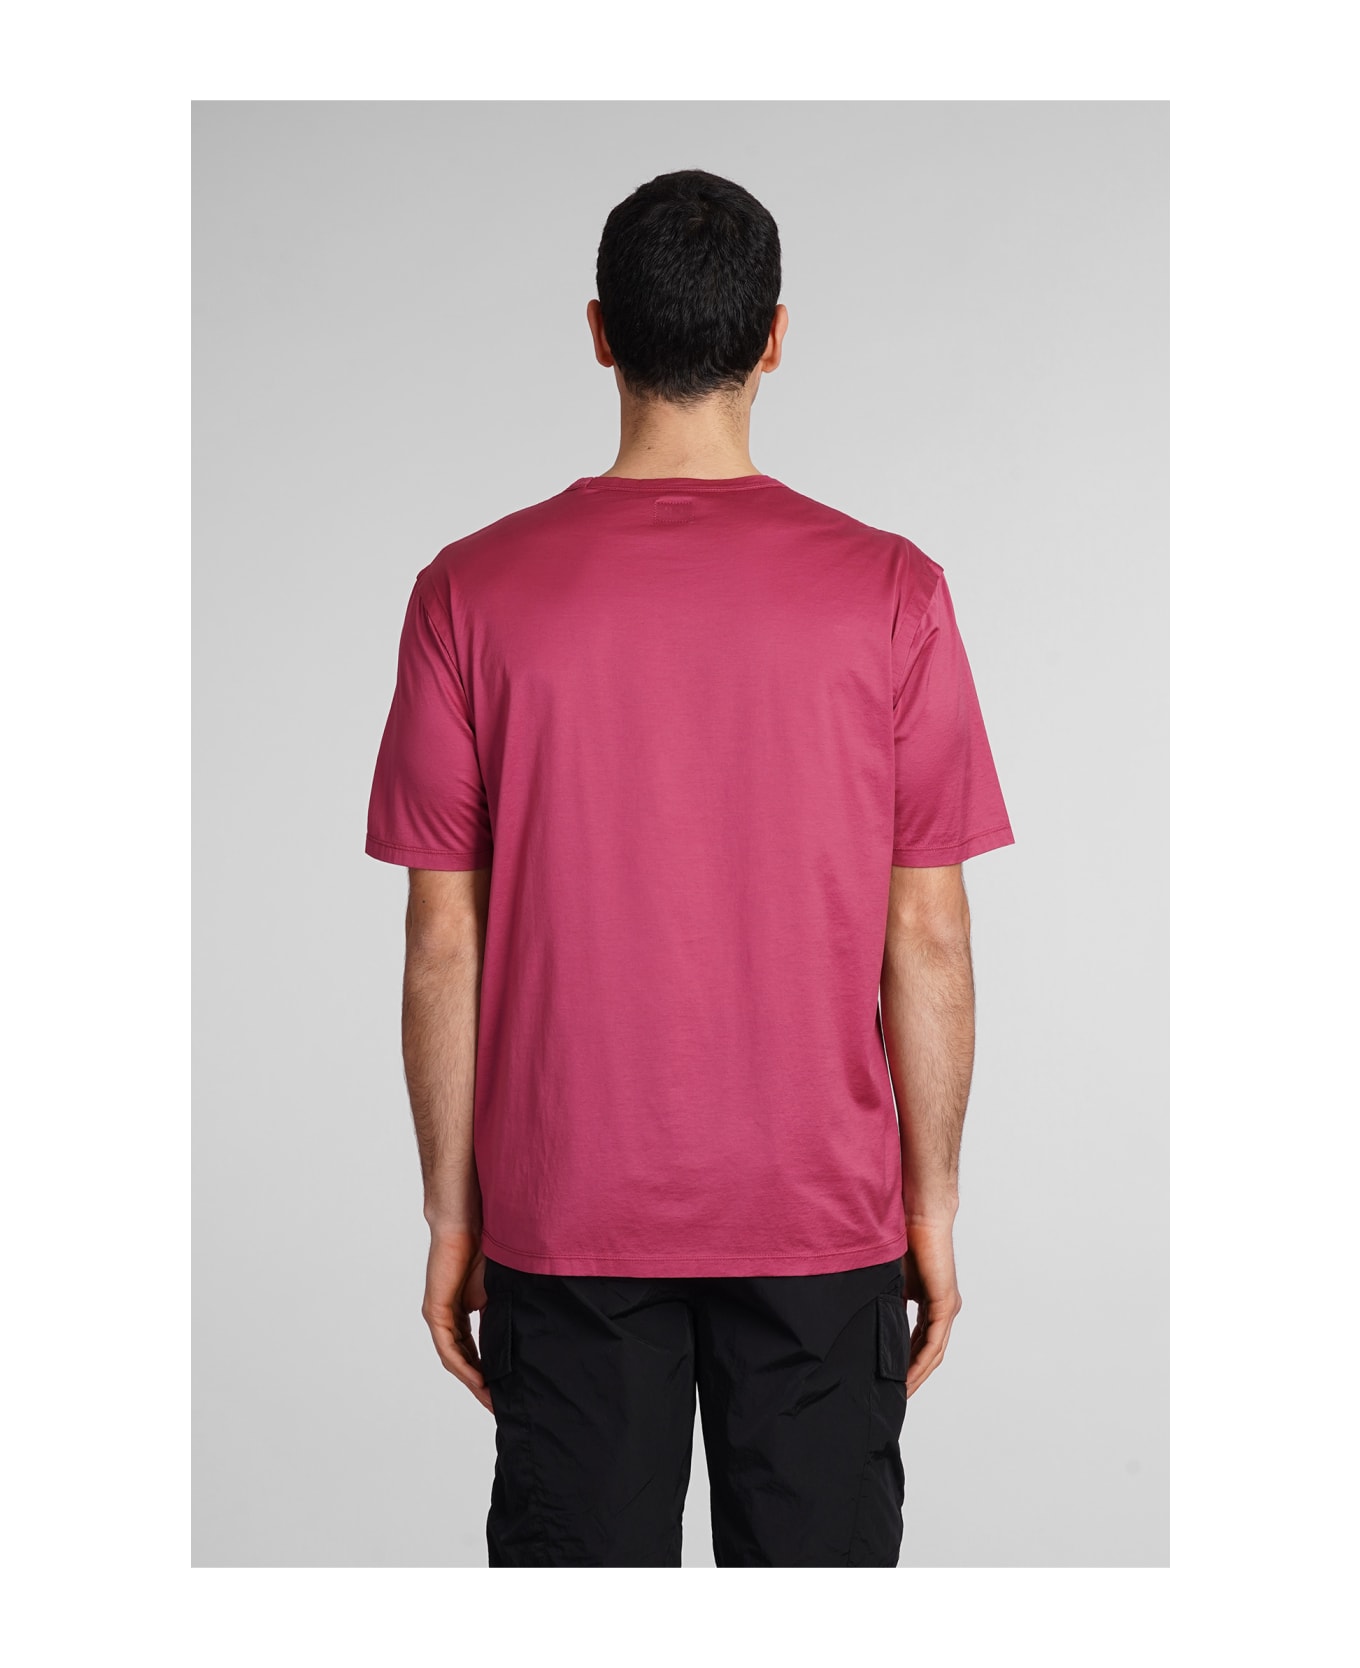 C.P. Company T-shirt In Red Cotton - red シャツ